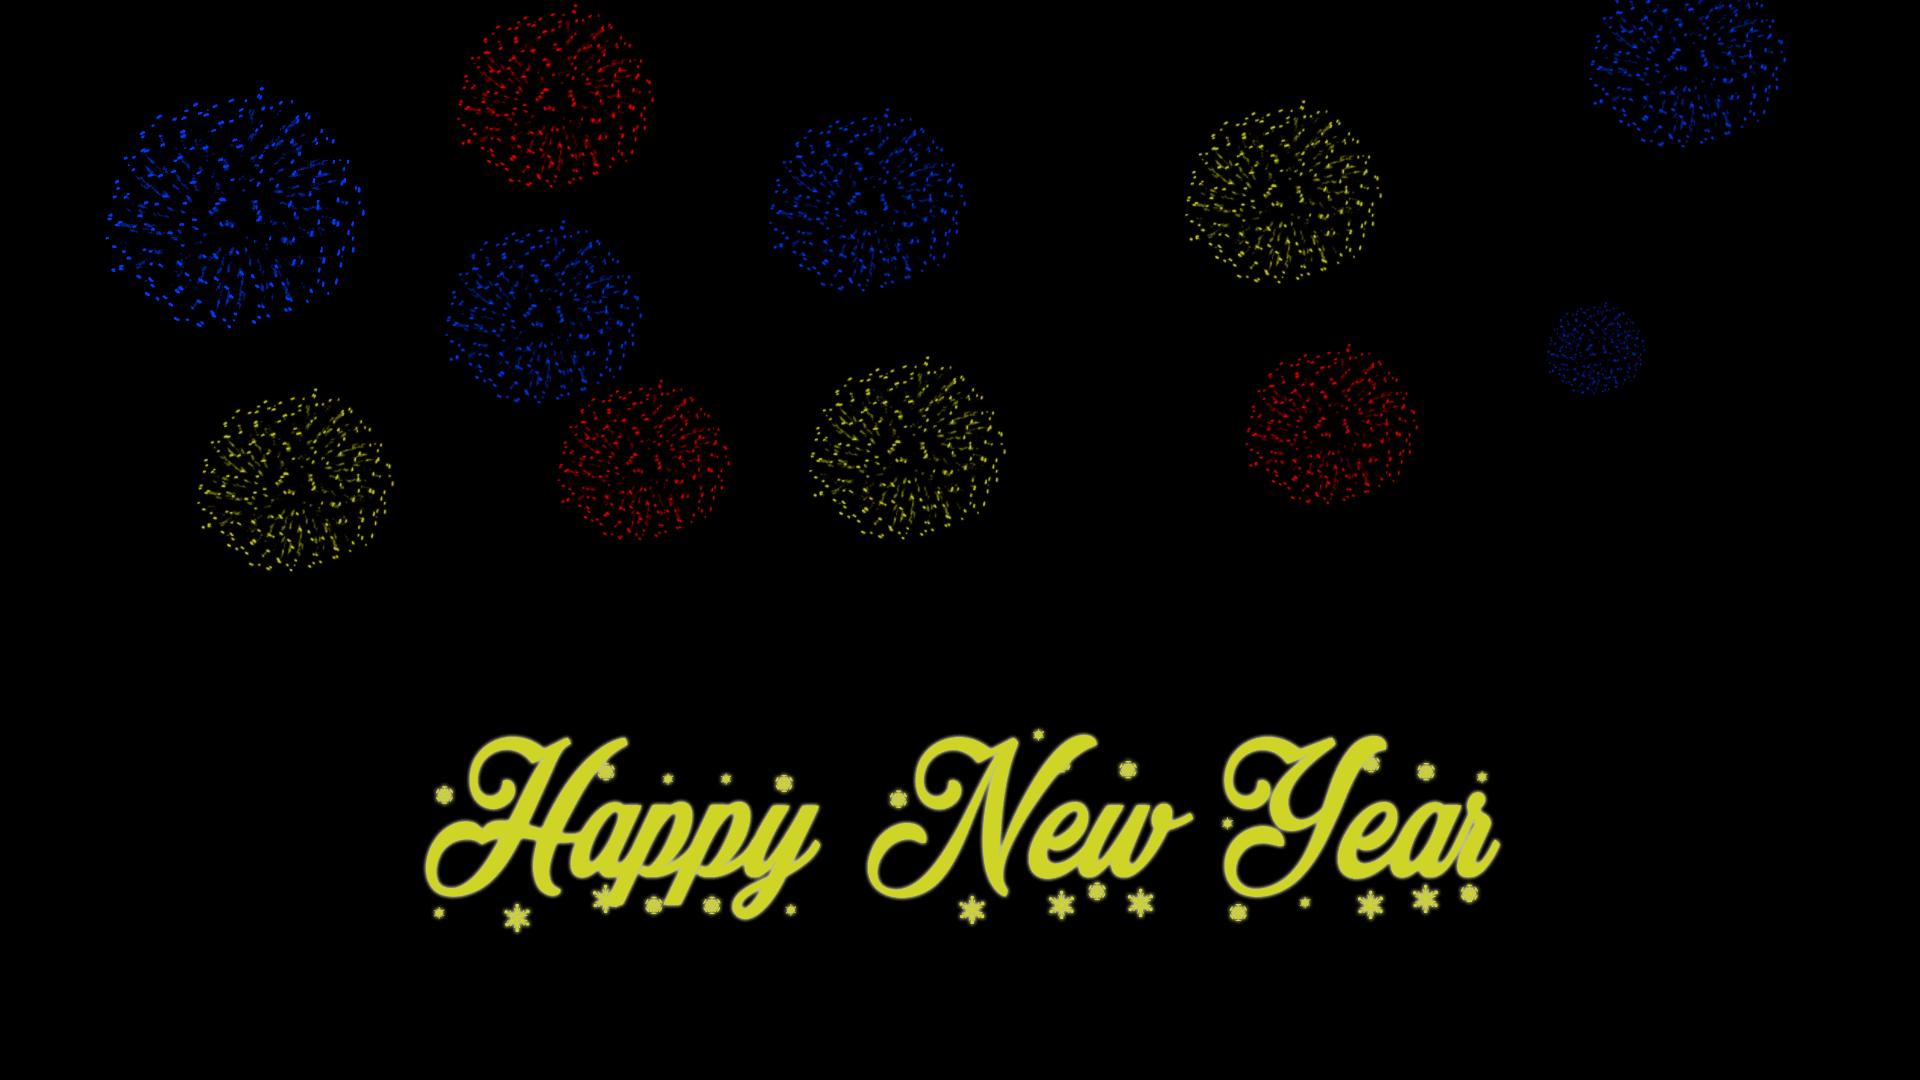 New Year 2018 Celebration Gif,Pictures&Wallpapers - 9to5 Car Wallpapers